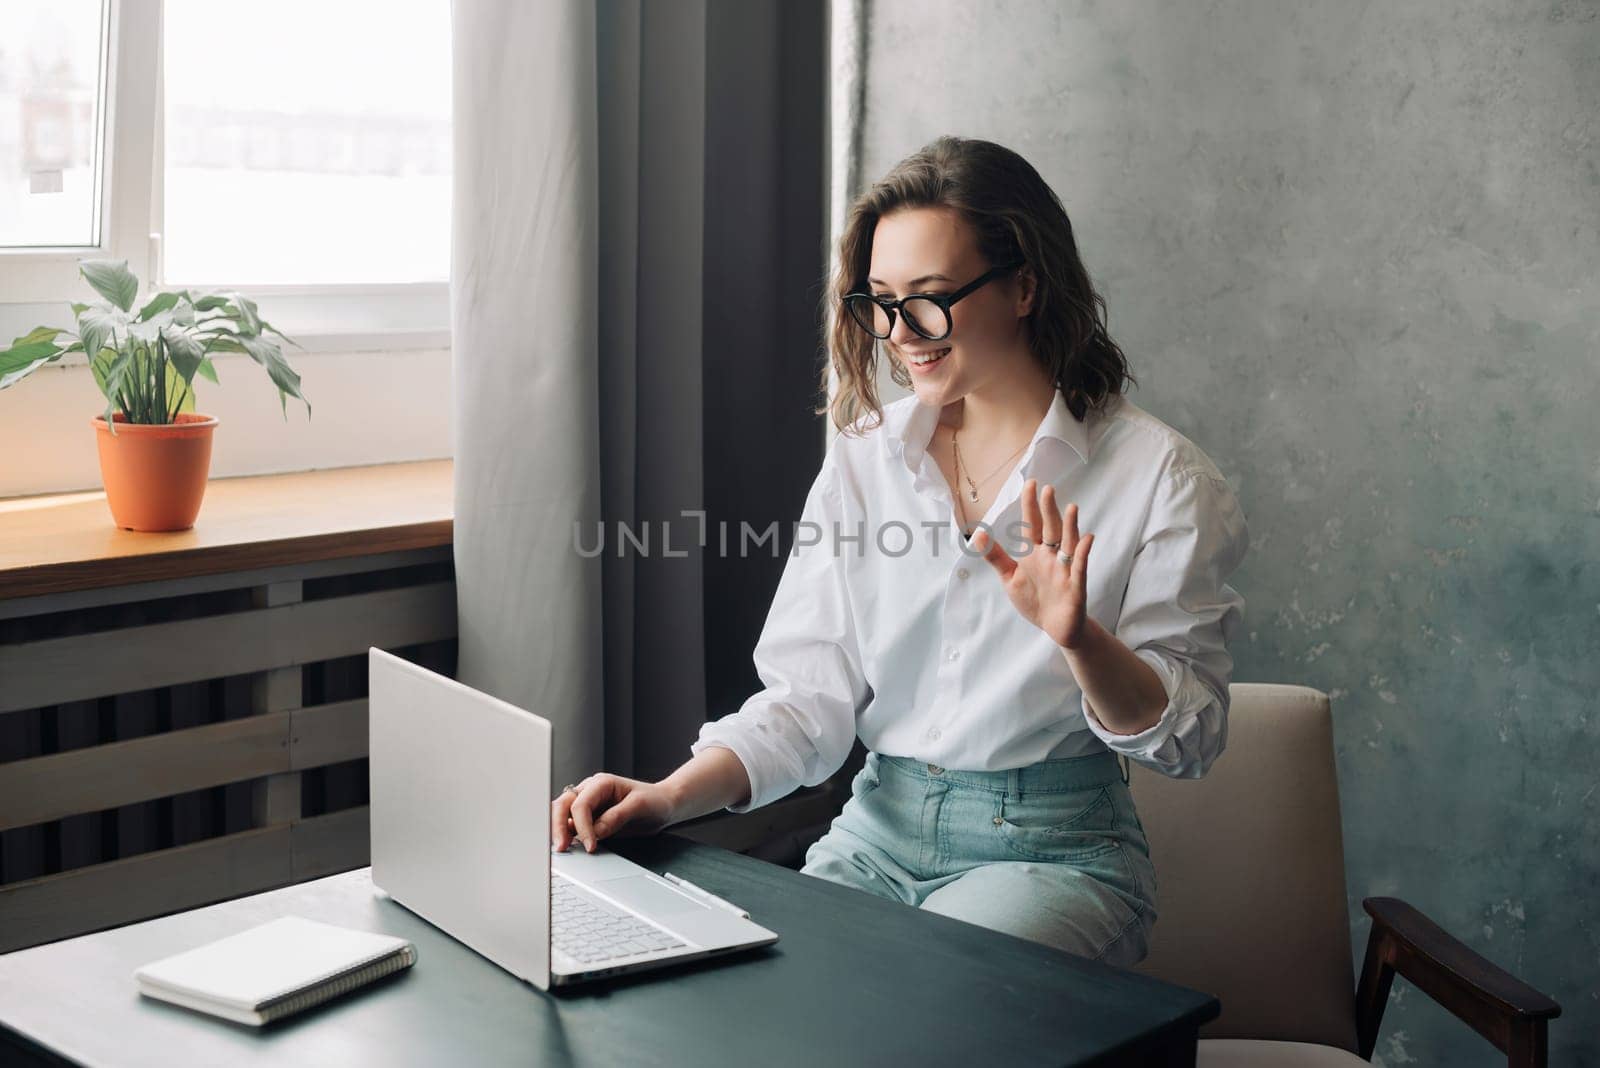 Digital Business Connection: Smiling Young Woman Leading Online Business Meeting, Embracing Remote Work as a Young Businesswoman or Freelancer Engaged in Virtual Collaboration on Laptop. by ViShark